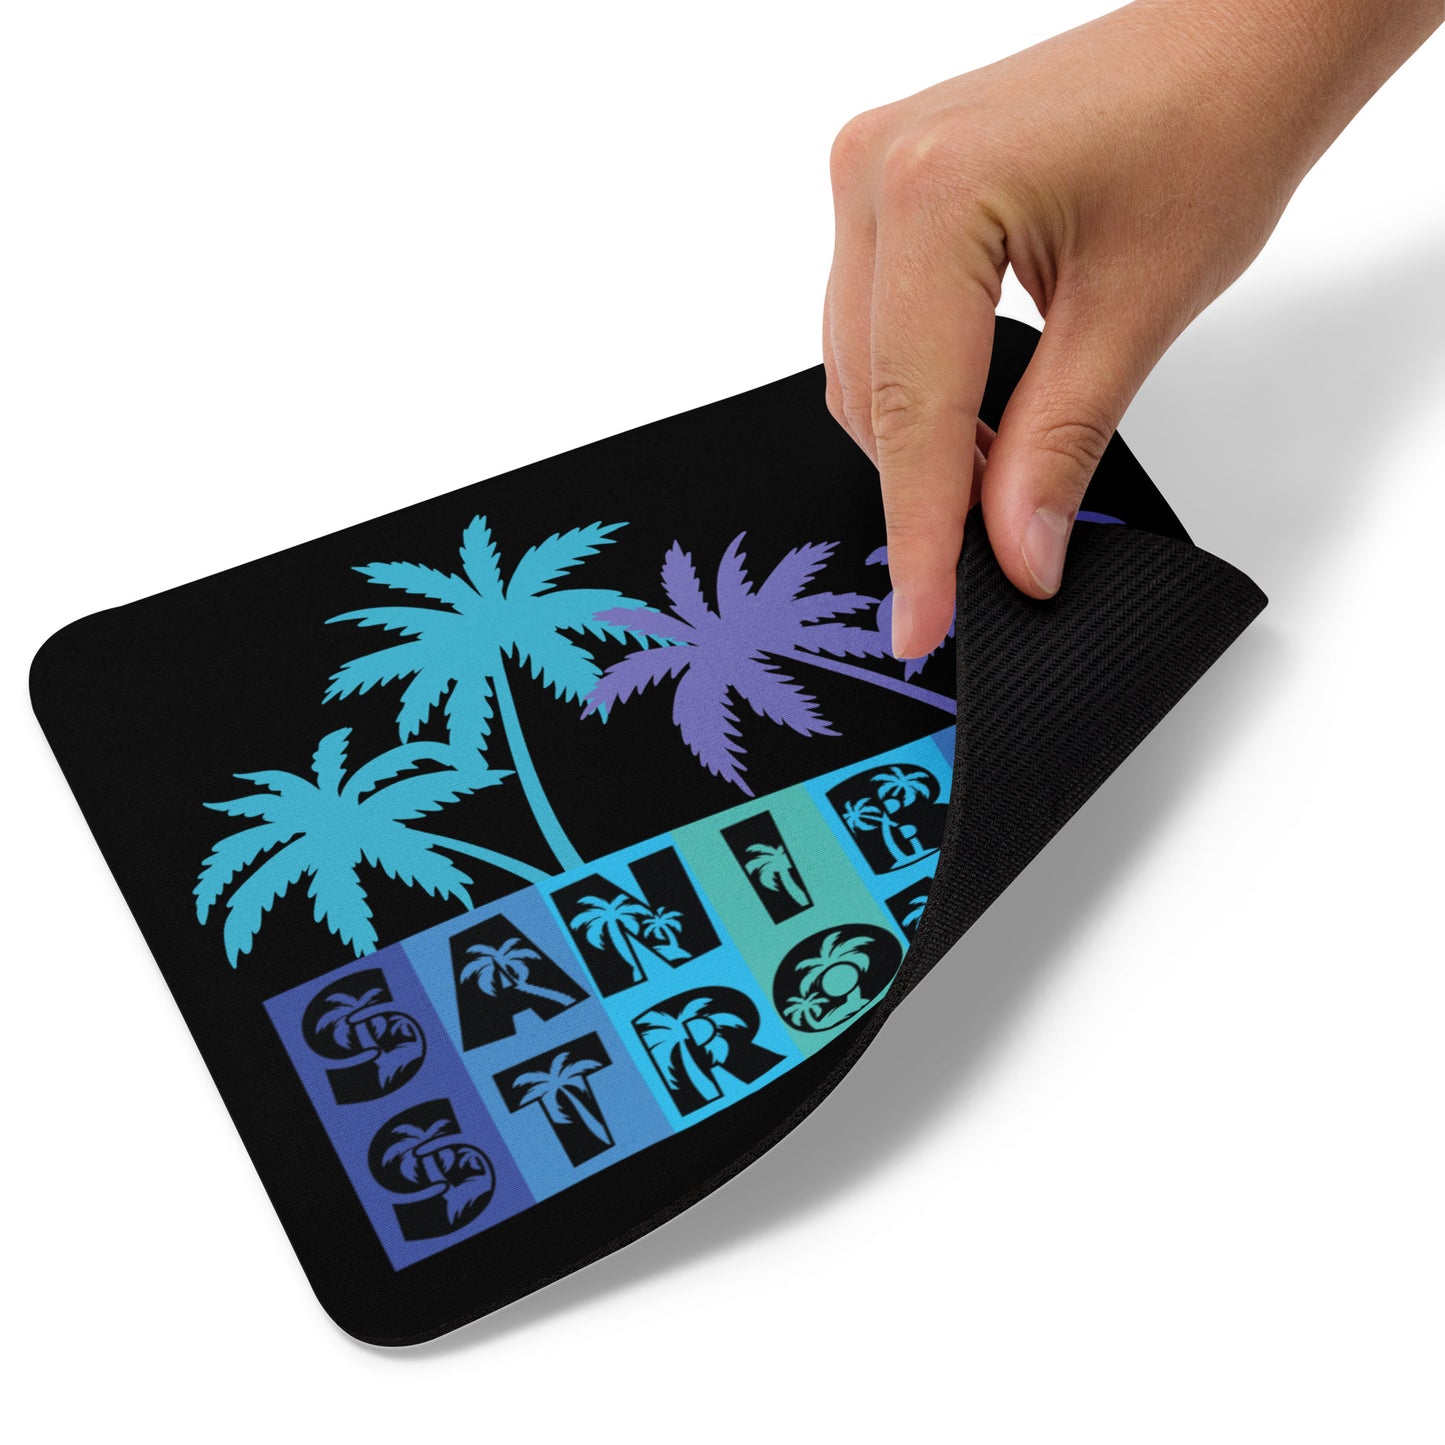 Sanibel Strong Mouse Pad - Blue Design - Palm Tree Lettering